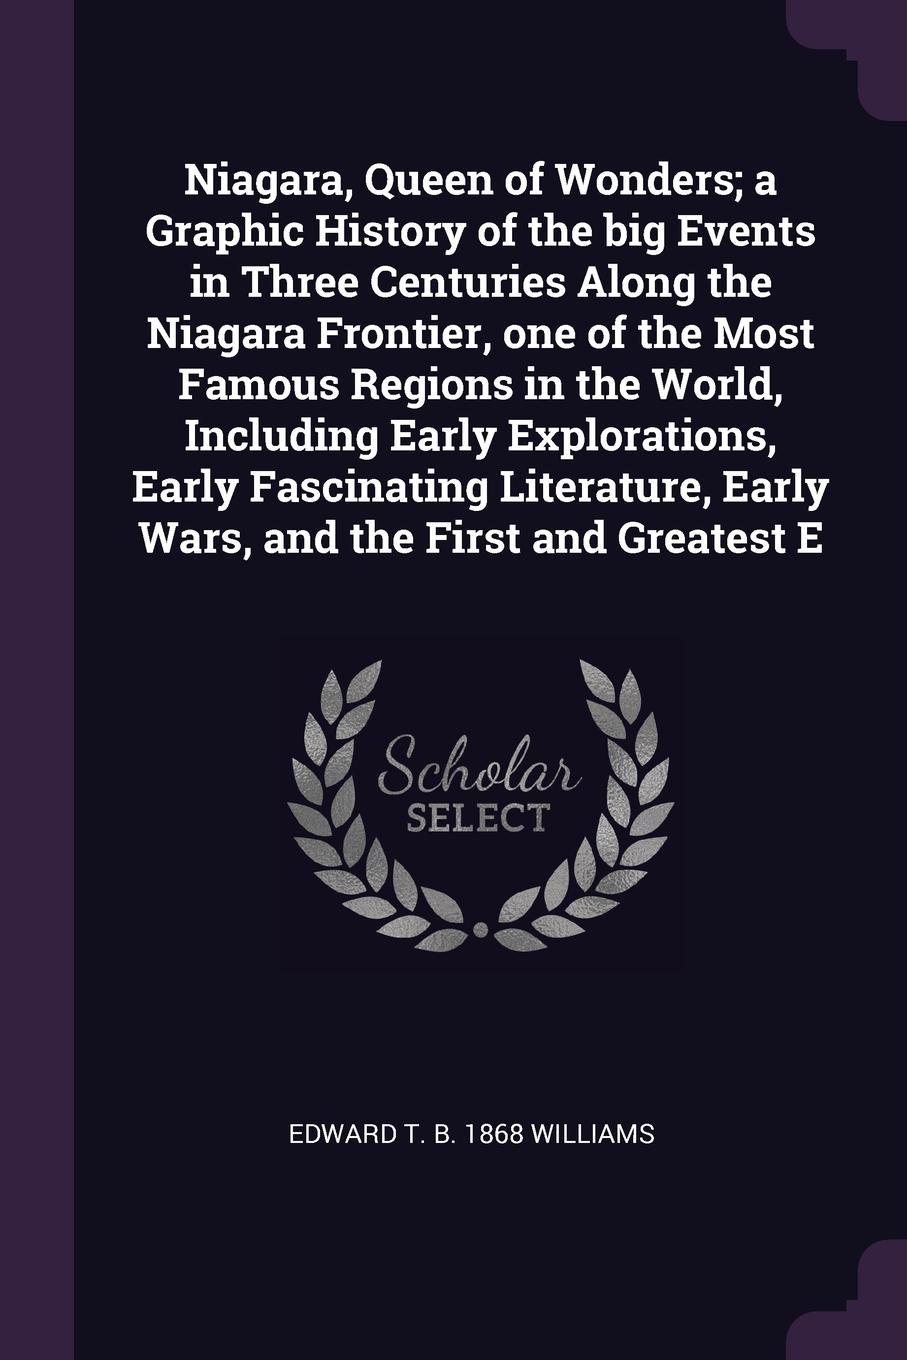 Niagara, Queen of Wonders; a Graphic History of the big Events in Three Centuries Along the Niagara Frontier, one of the Most Famous Regions in the World, Including Early Explorations, Early Fascinating Literature, Early Wars, and the First and Gr...